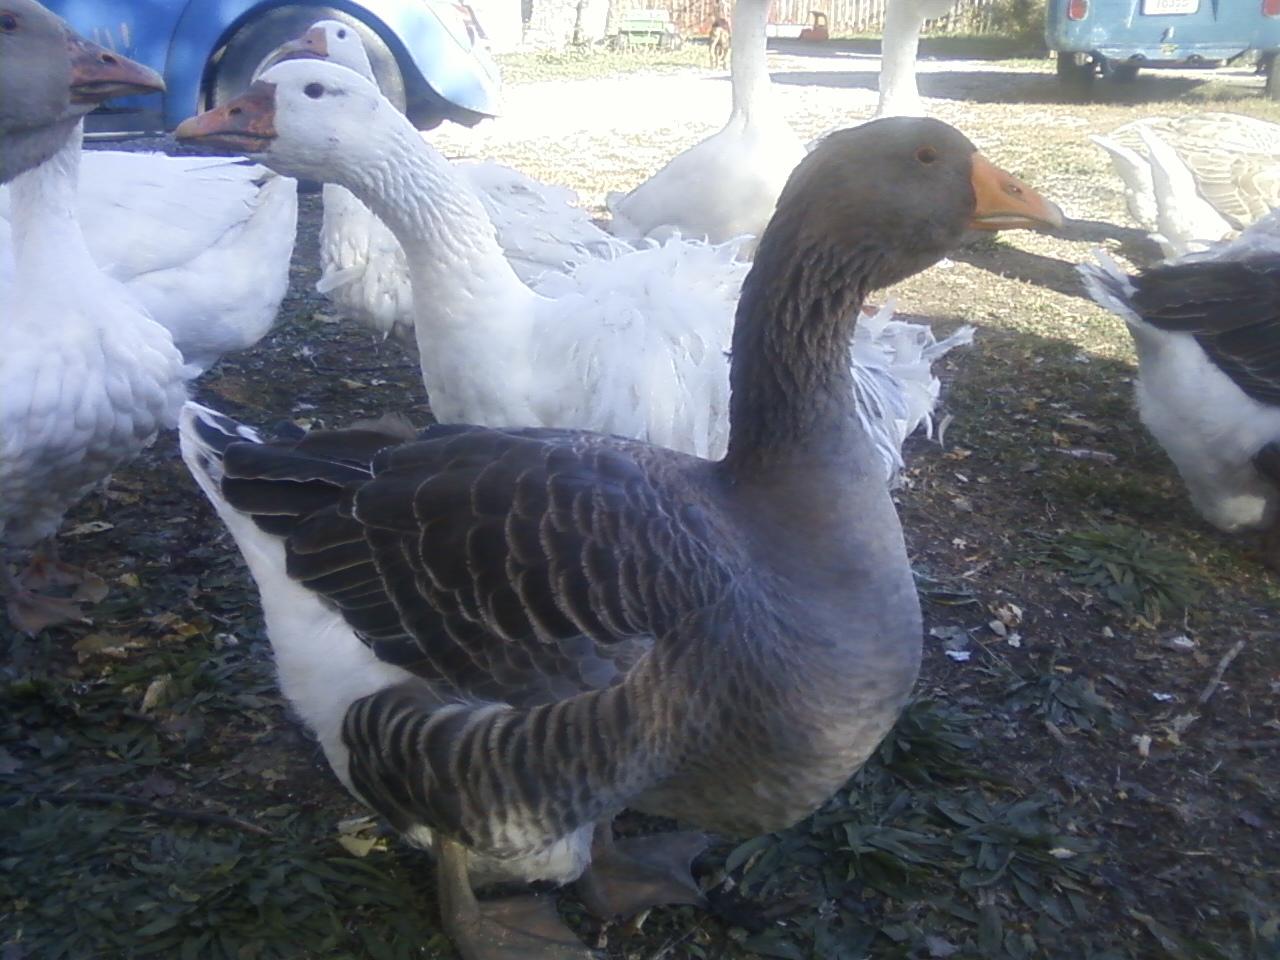 A Gray Dewlap Toulouse in forground, with a White Sebastopol in rear, surrounded by other Sebastopols, Buff Dewlap Toulouse, and White African Dewlap Geese